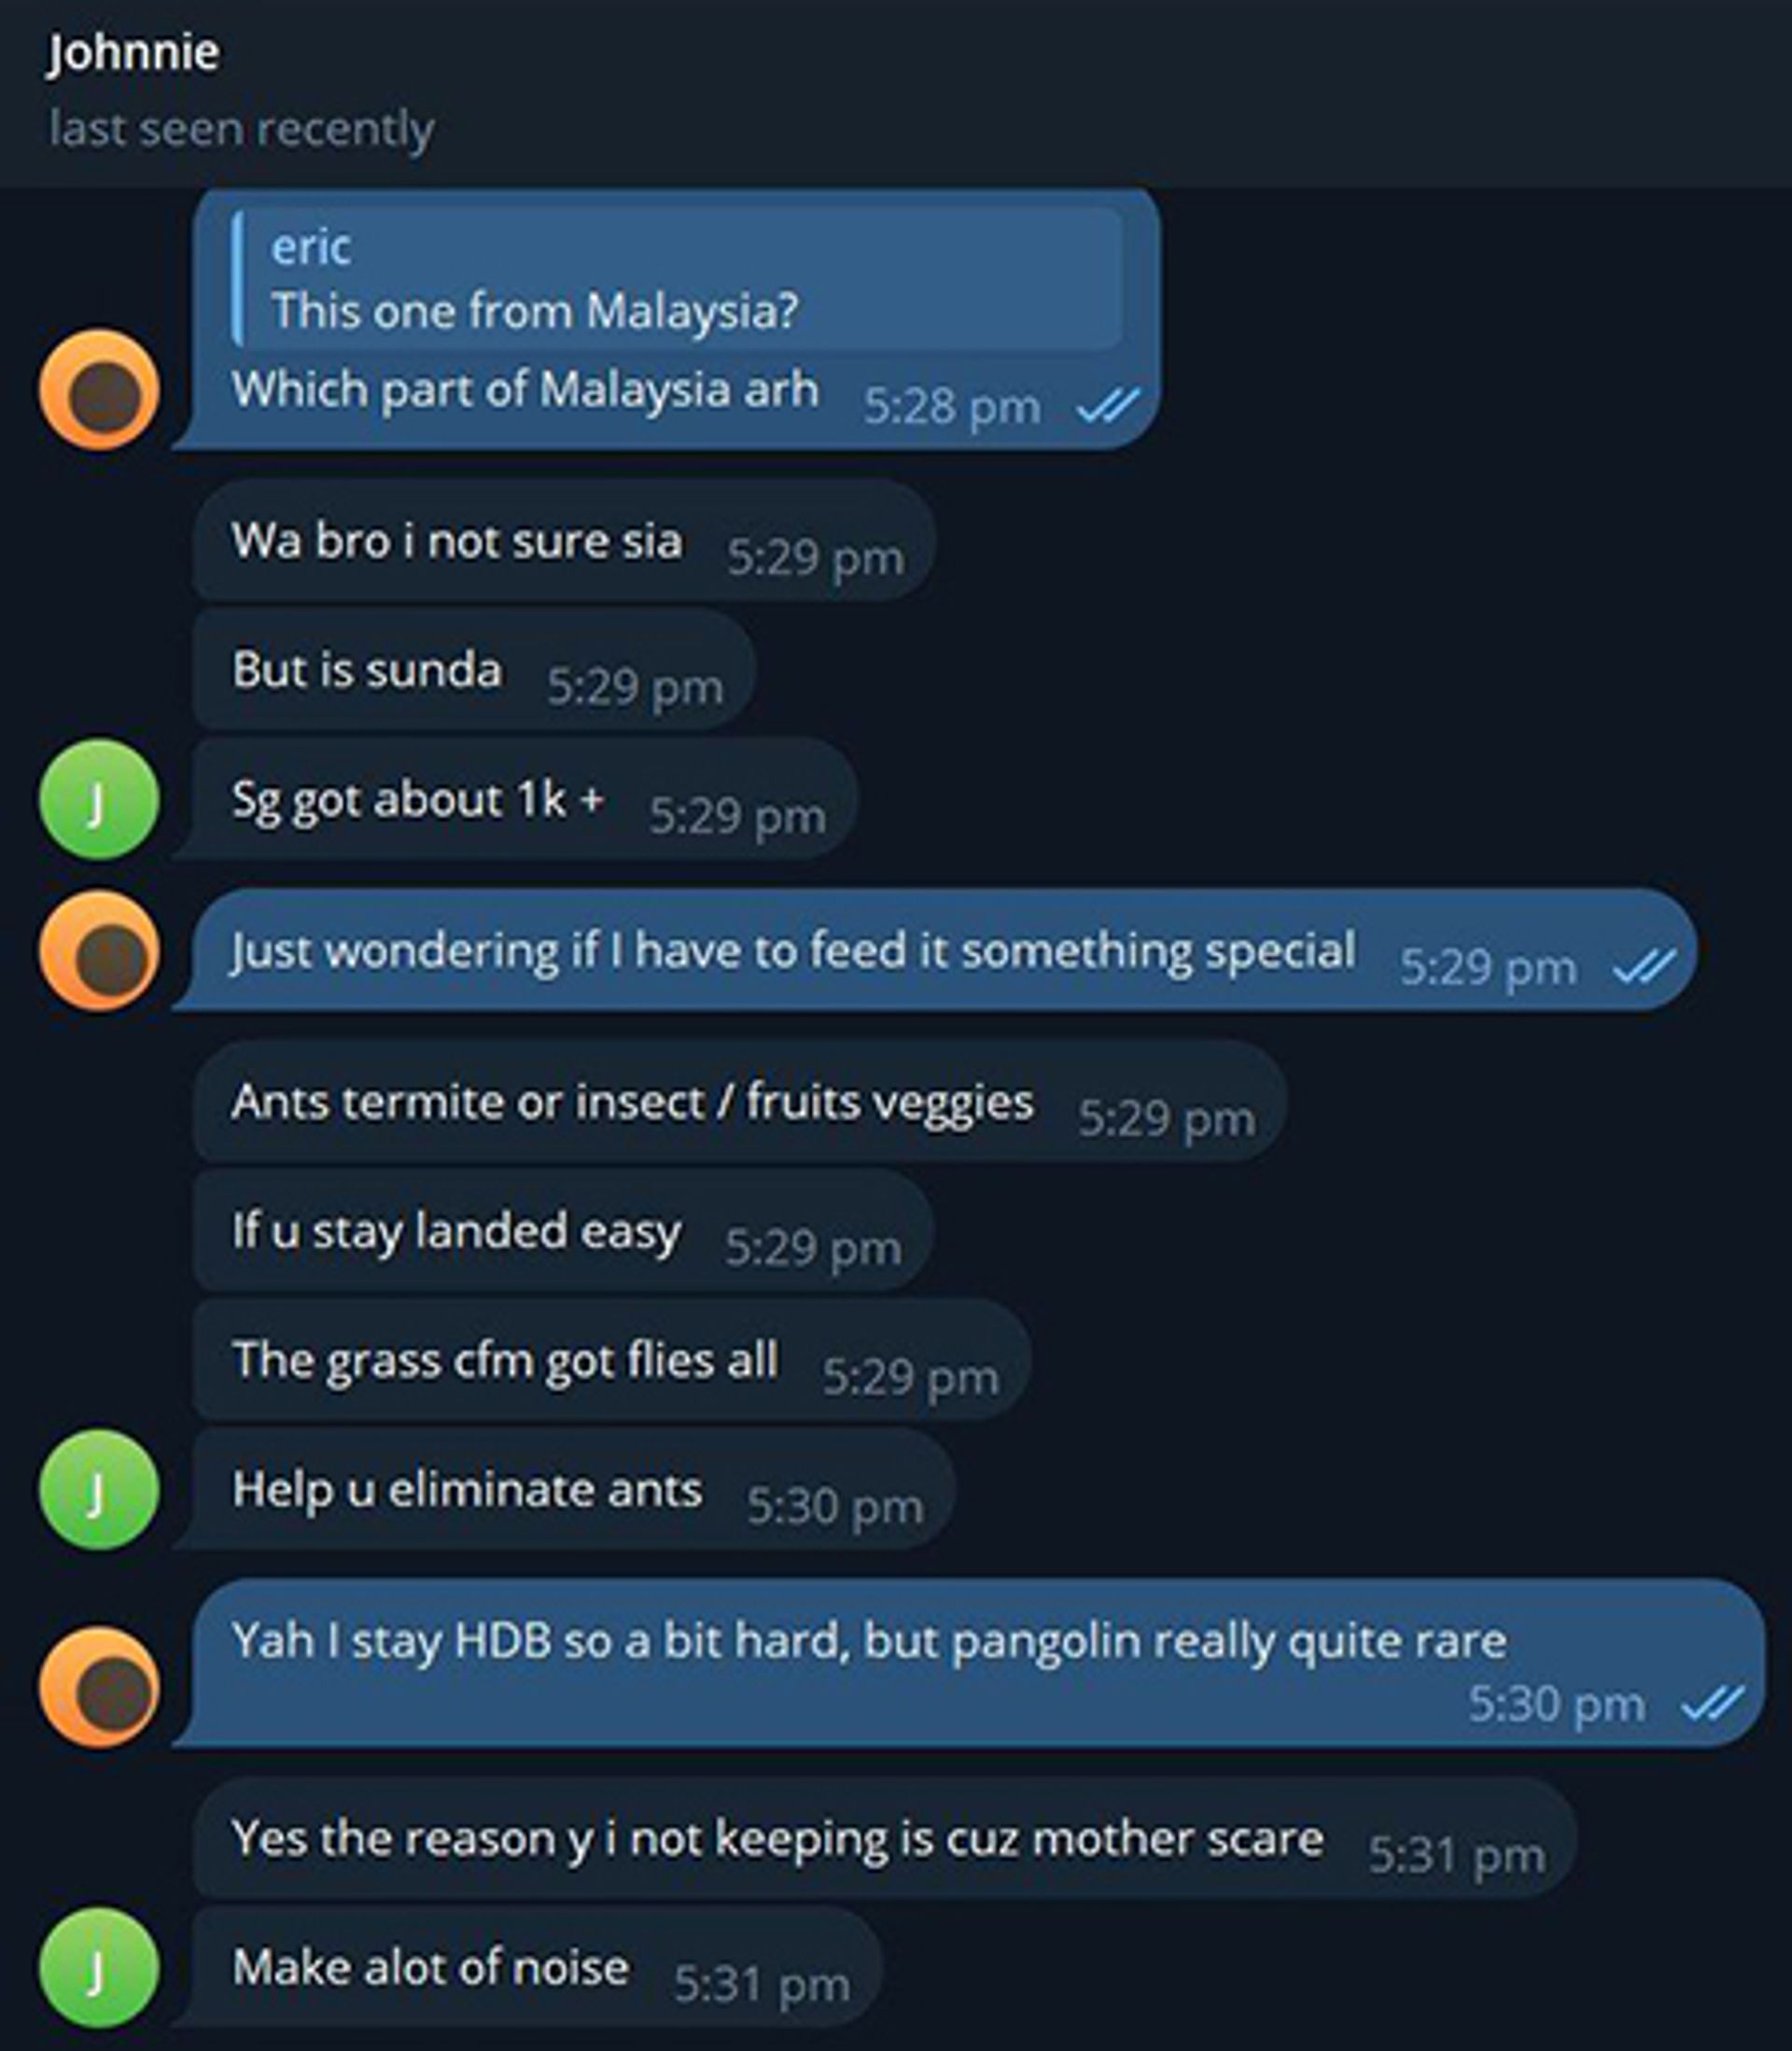 The conversation between this reporter and the pangolin seller called “Johnnie”. PHOTO: SCREENGRAB FROM TELEGRAM